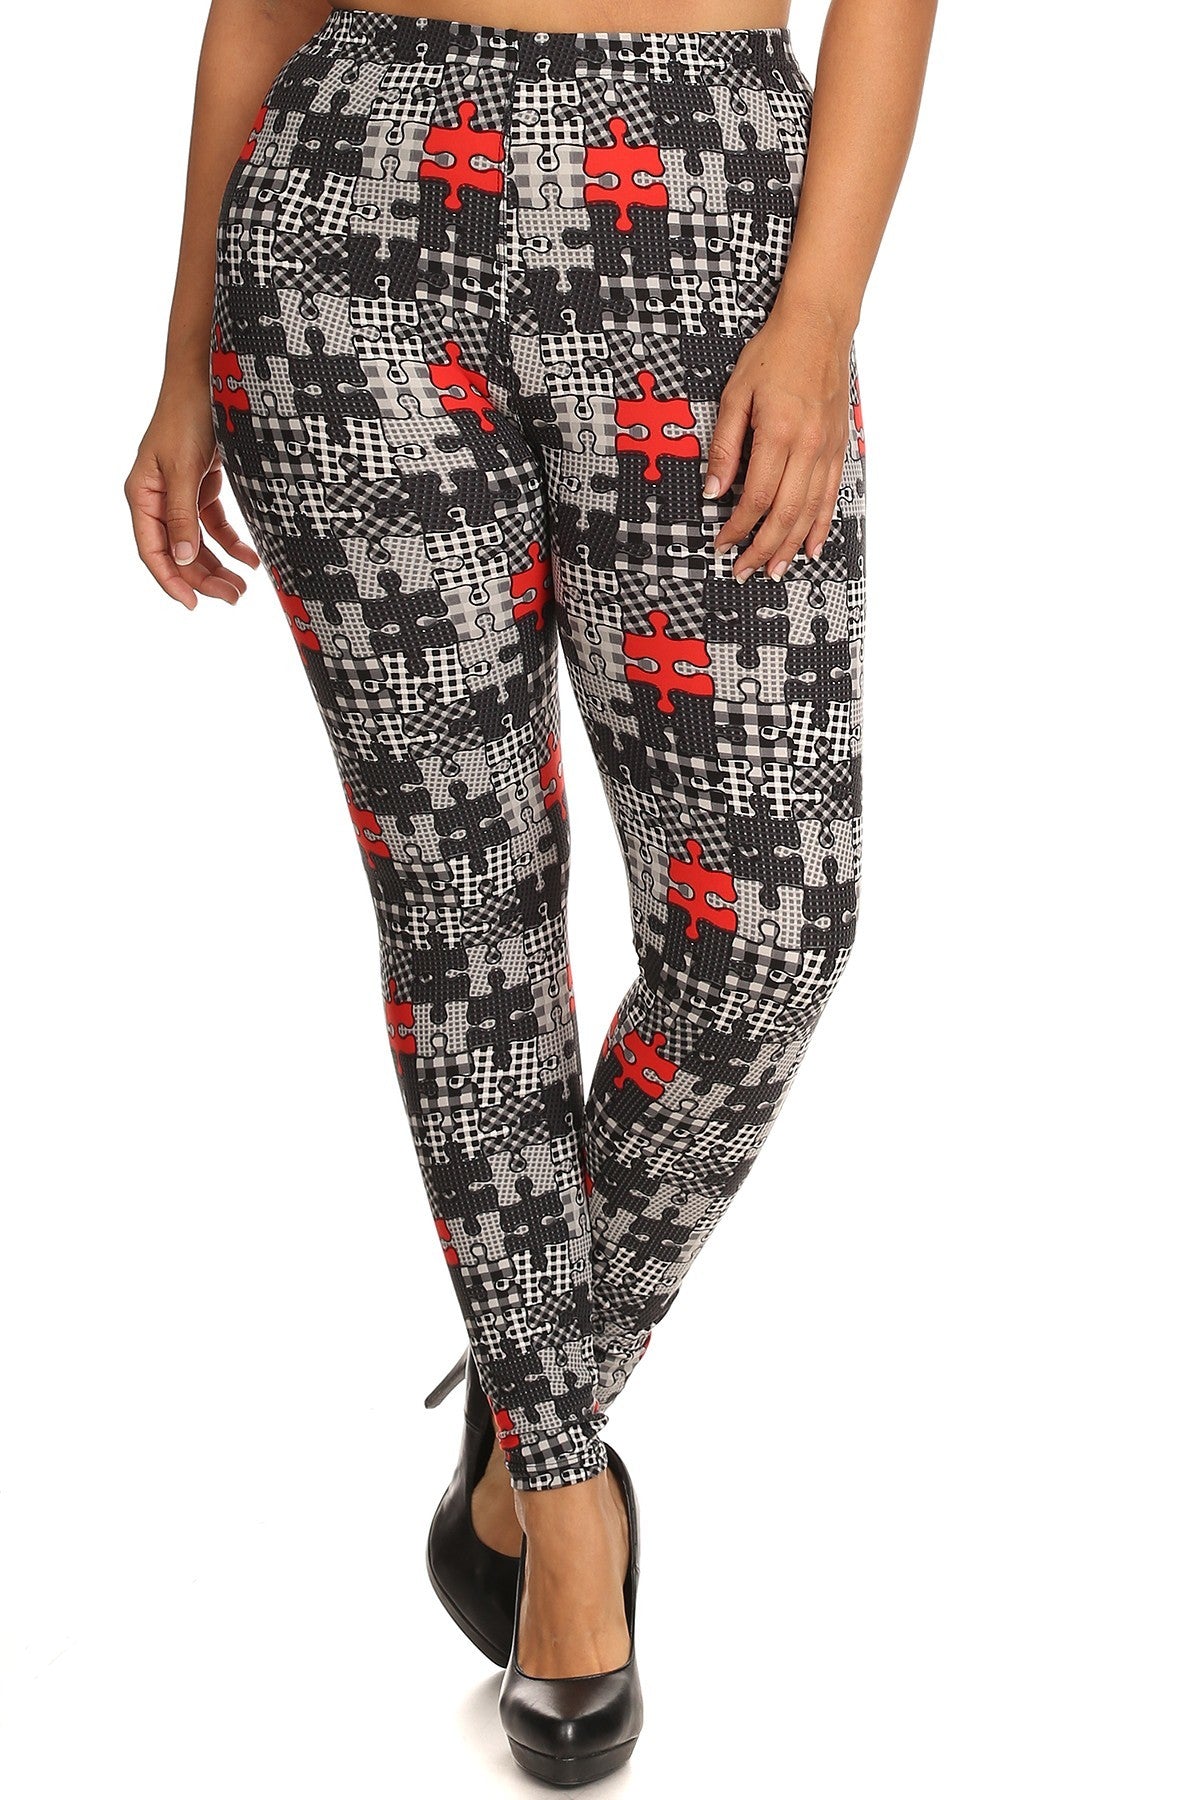 Plus Size Puzzle/plaid Print, Full Length Leggings In A Slim Fitting Style With A Banded High Waist